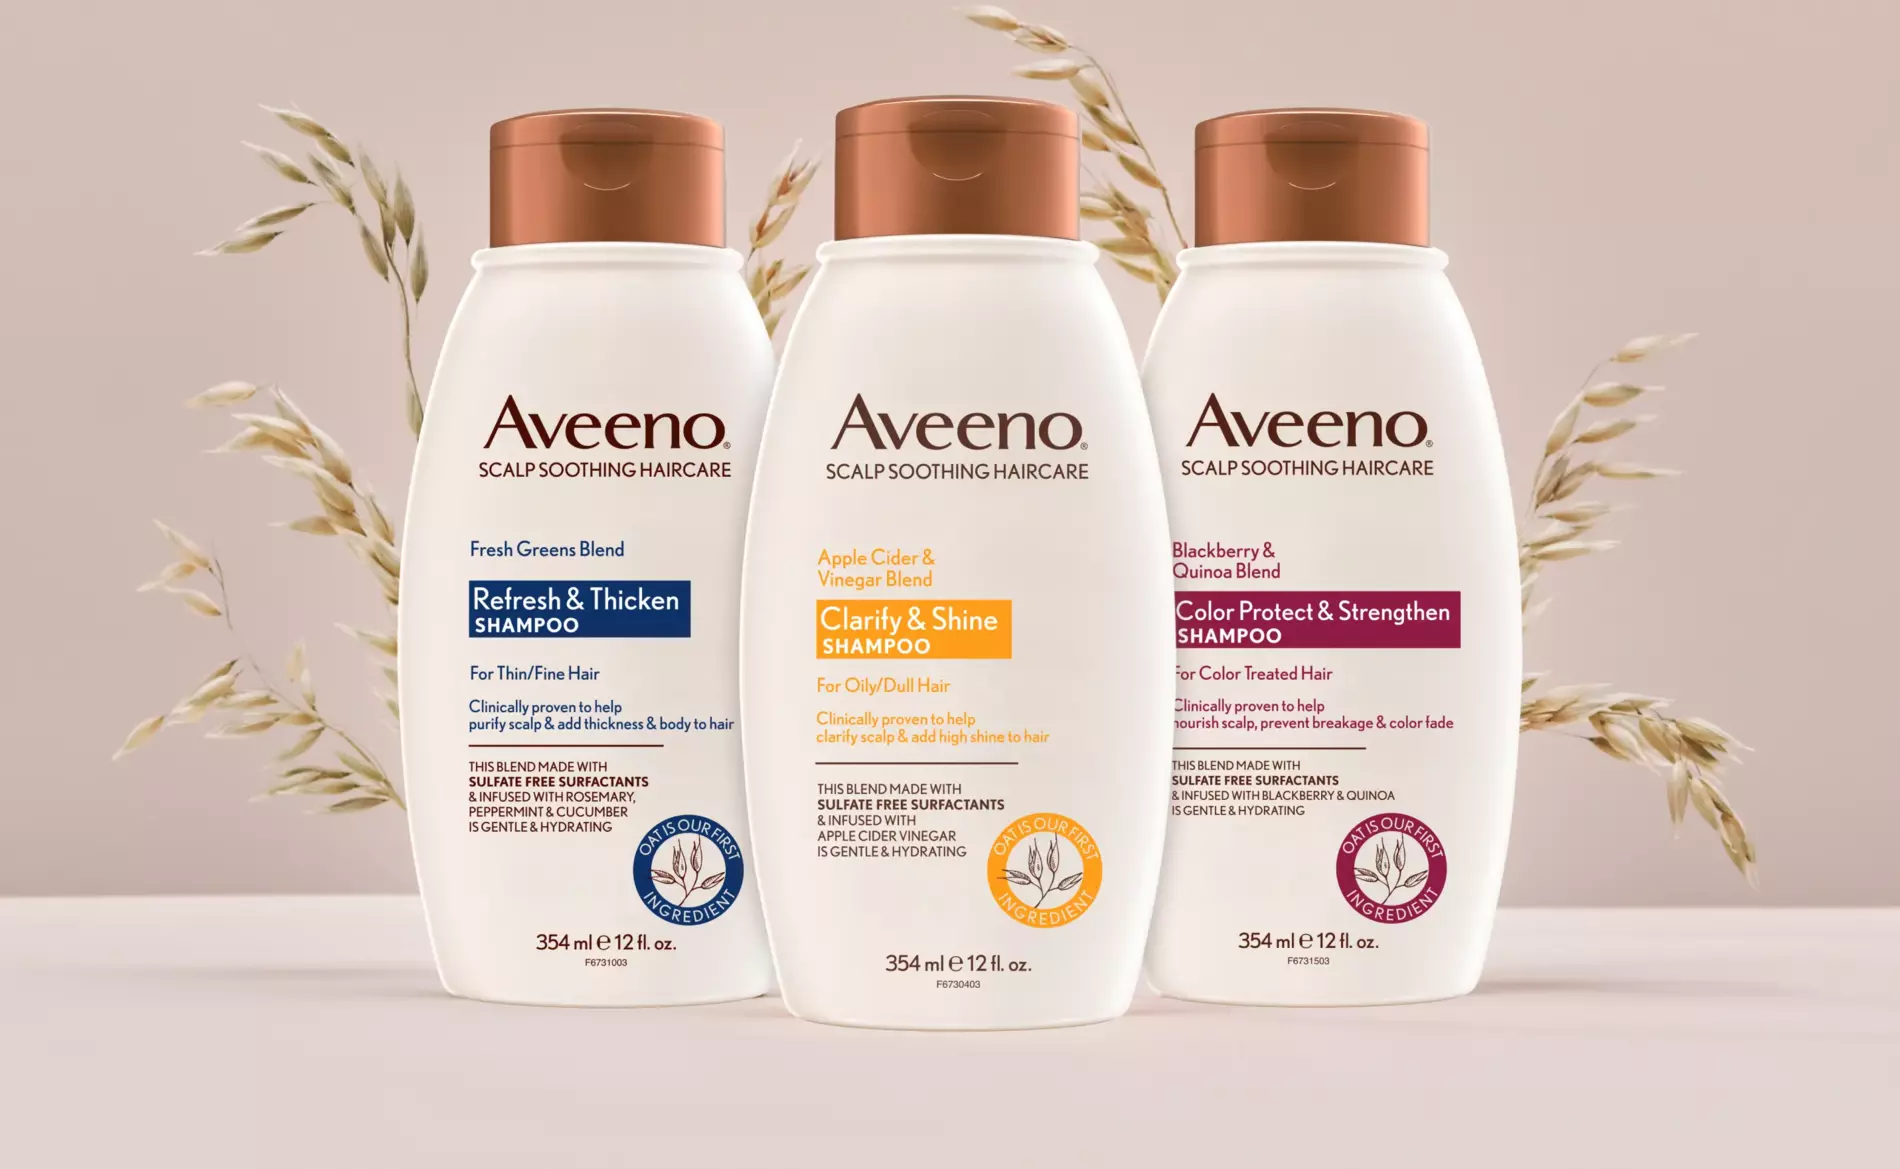 Three bottles of Aveeno® Scalp Soothing Haircare are displayed in front of a bunch of oats plants